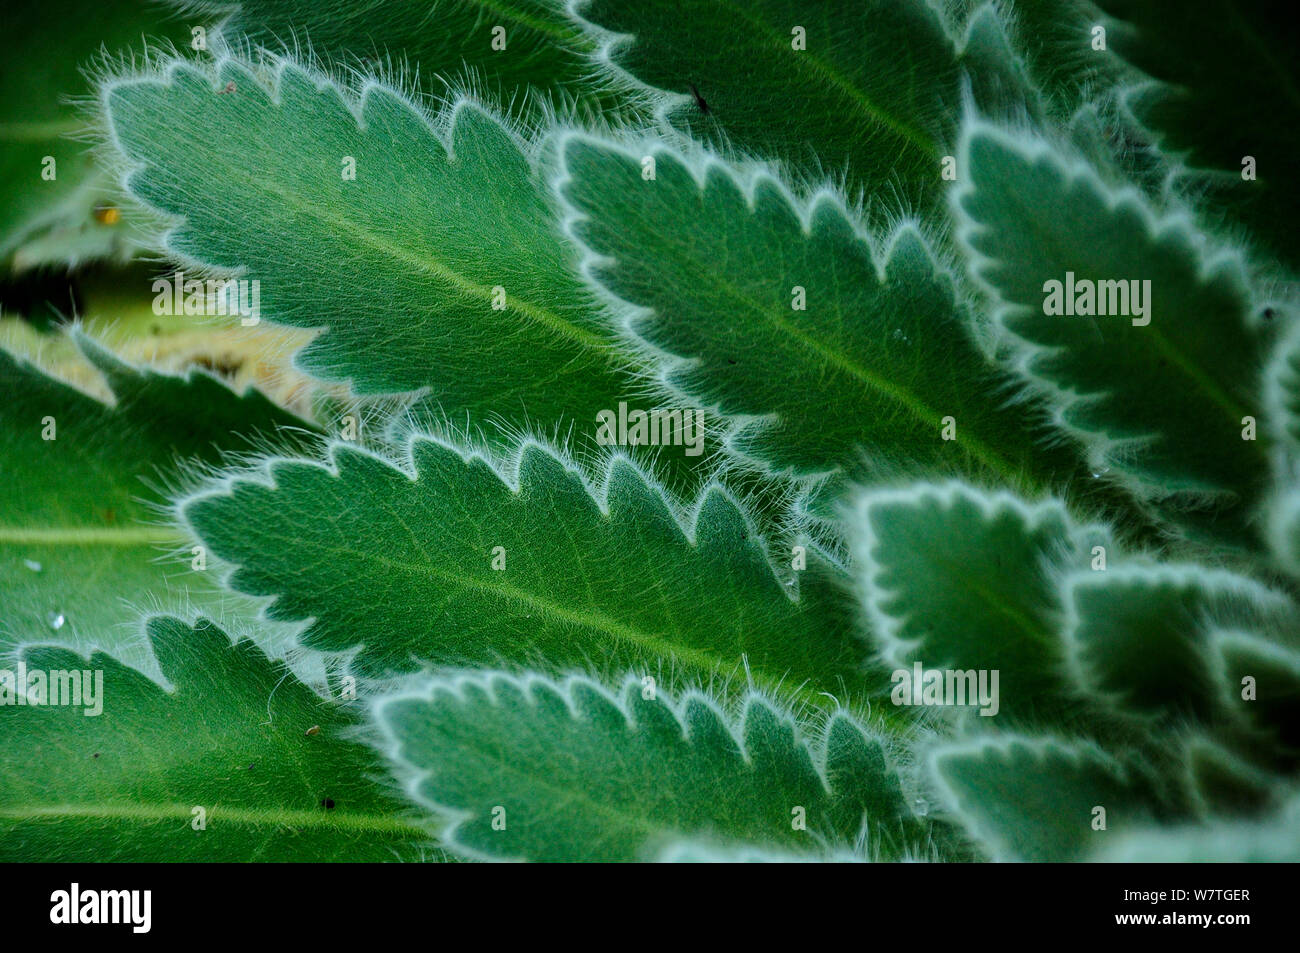 Close up Meconopsis paniculata leaves at 3,500 meters altitude in the Annapurna Sanctuary, central Nepal, November. Stock Photo